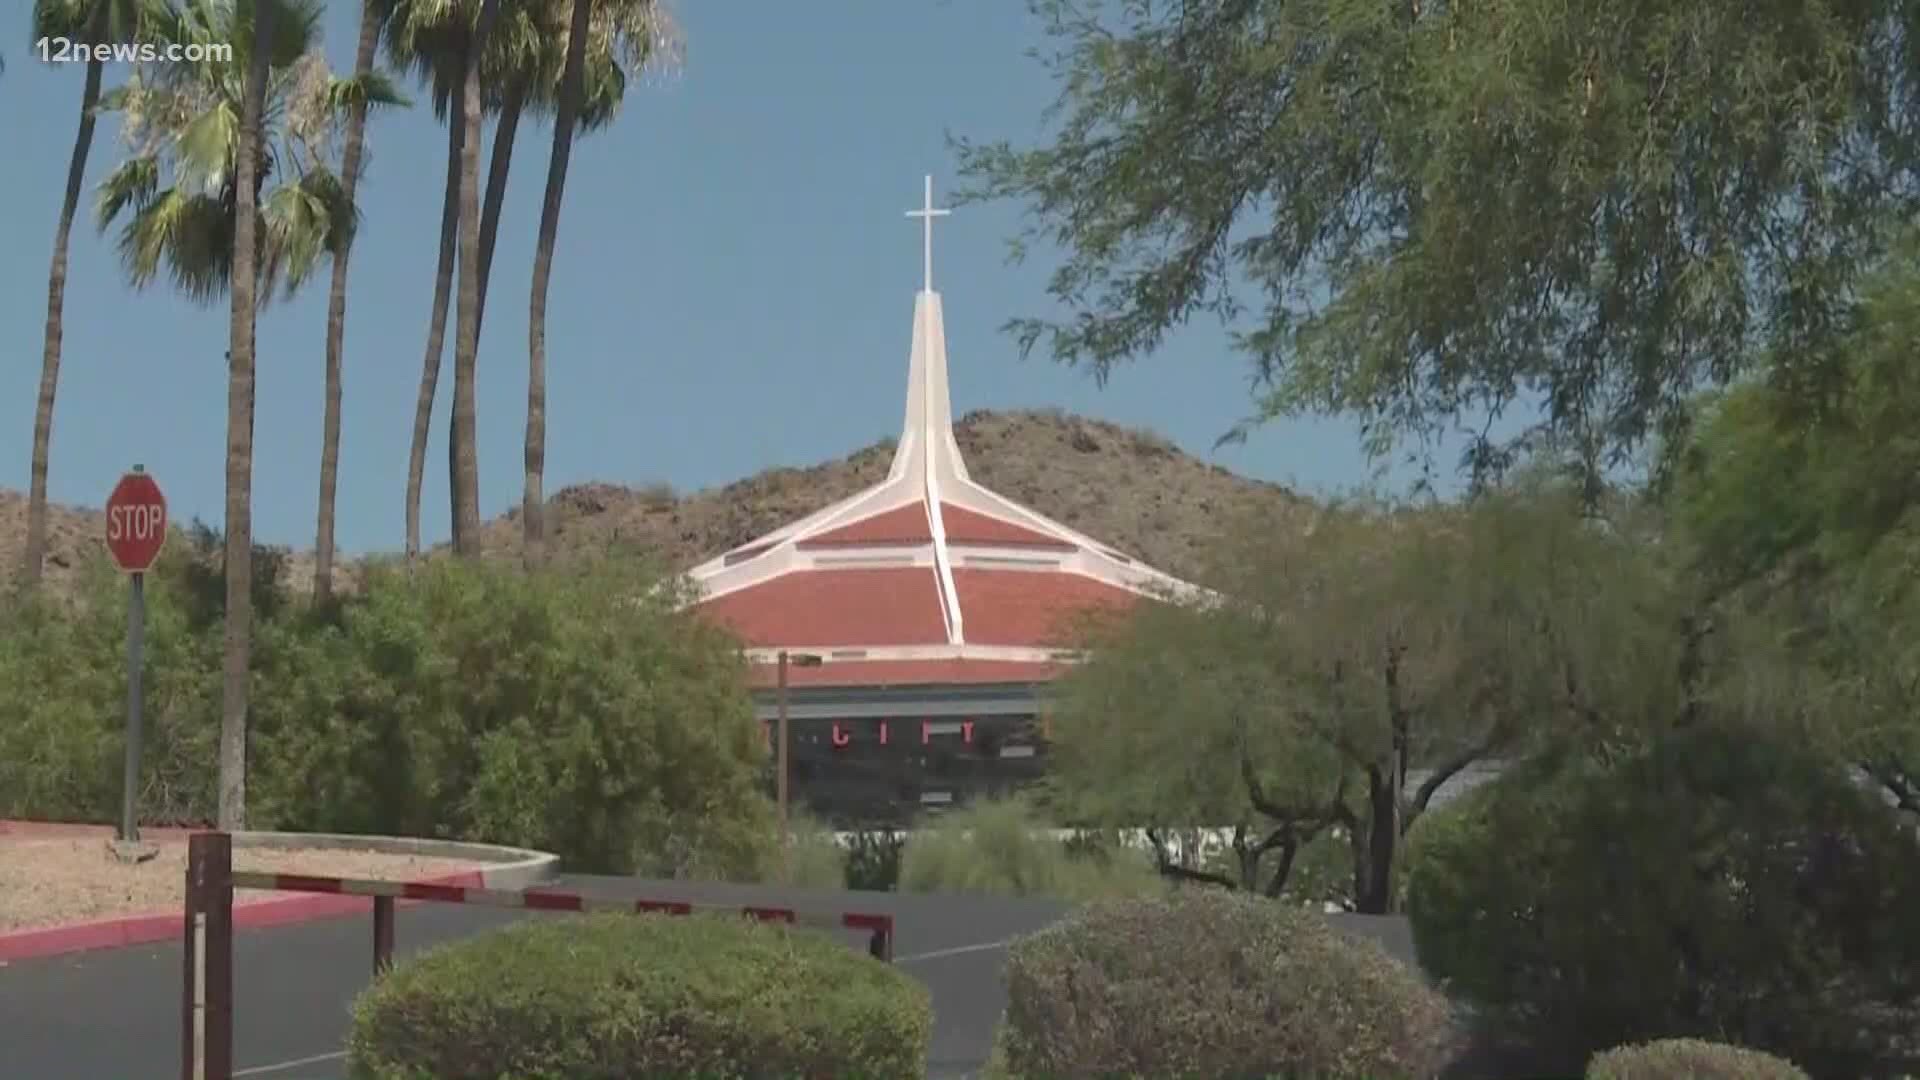 Arizona's attorney general is investigating Dream City Church. The church claimed to have an air filtration system that kills 99% of coronavirus.